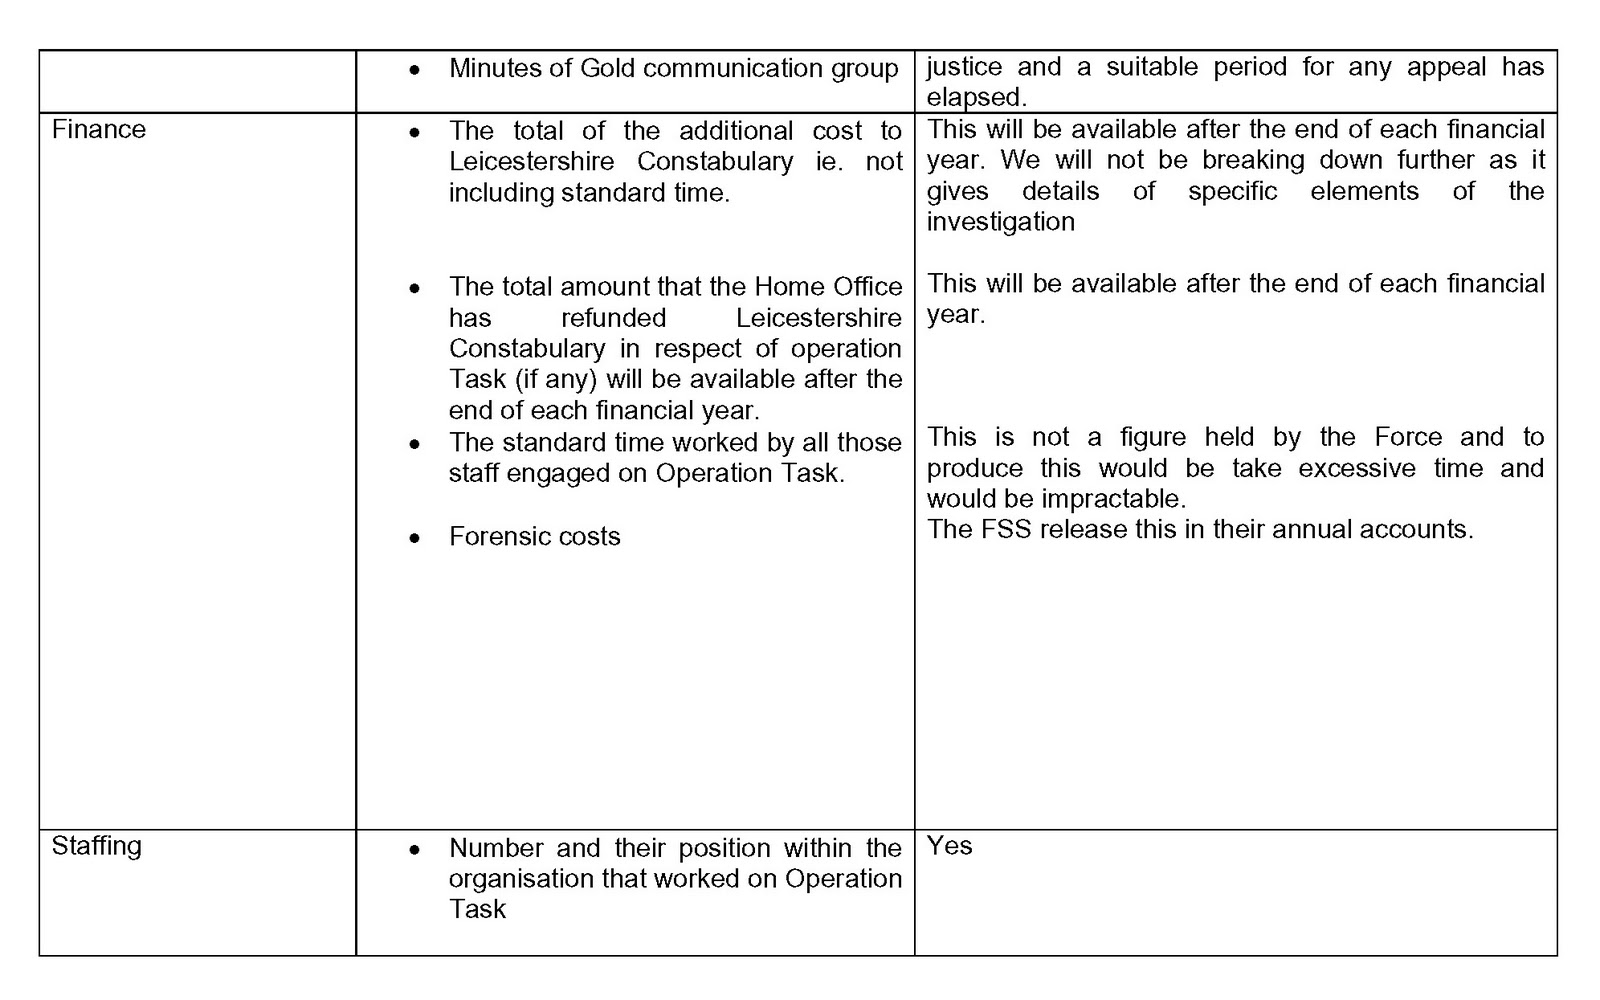 Operation Task Publication Strategy, page 3